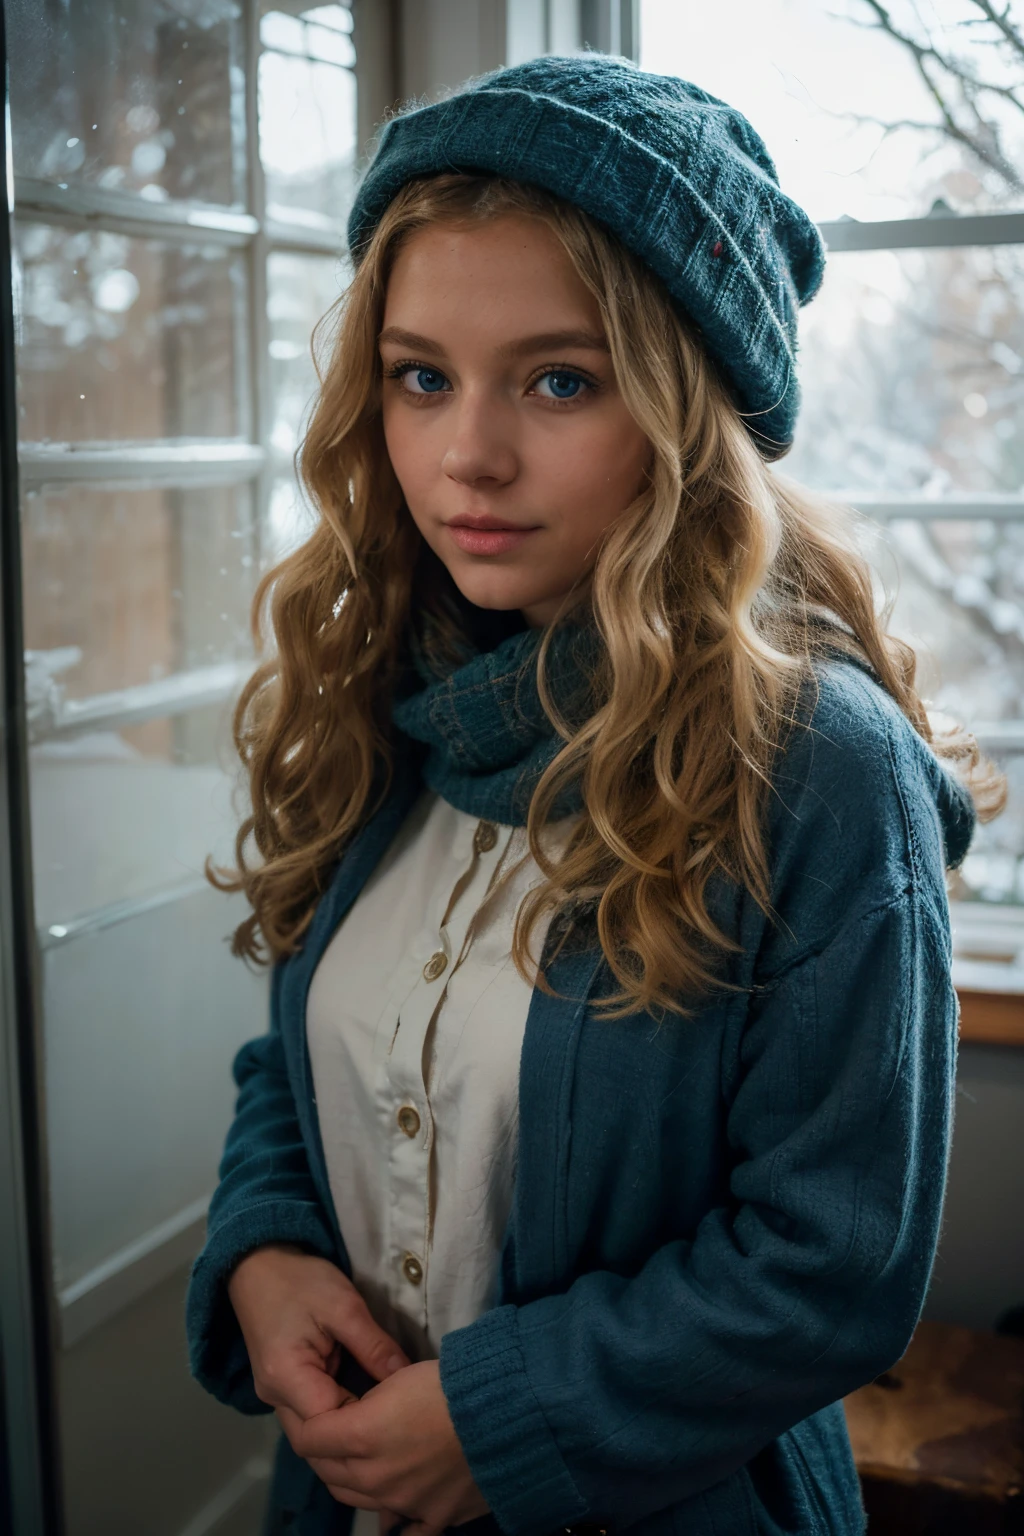 Capture the essence of a cozy Christmas photoshoot at home, highlighting a blonde girl with curly hair, captivating blue eyes, and a perfect silhouette dressed in fashionable winter clothes; employ natural light streaming through a window to create a soft, ethereal glow, Photography, Nikon Z7, 50mm f/1.8 lens